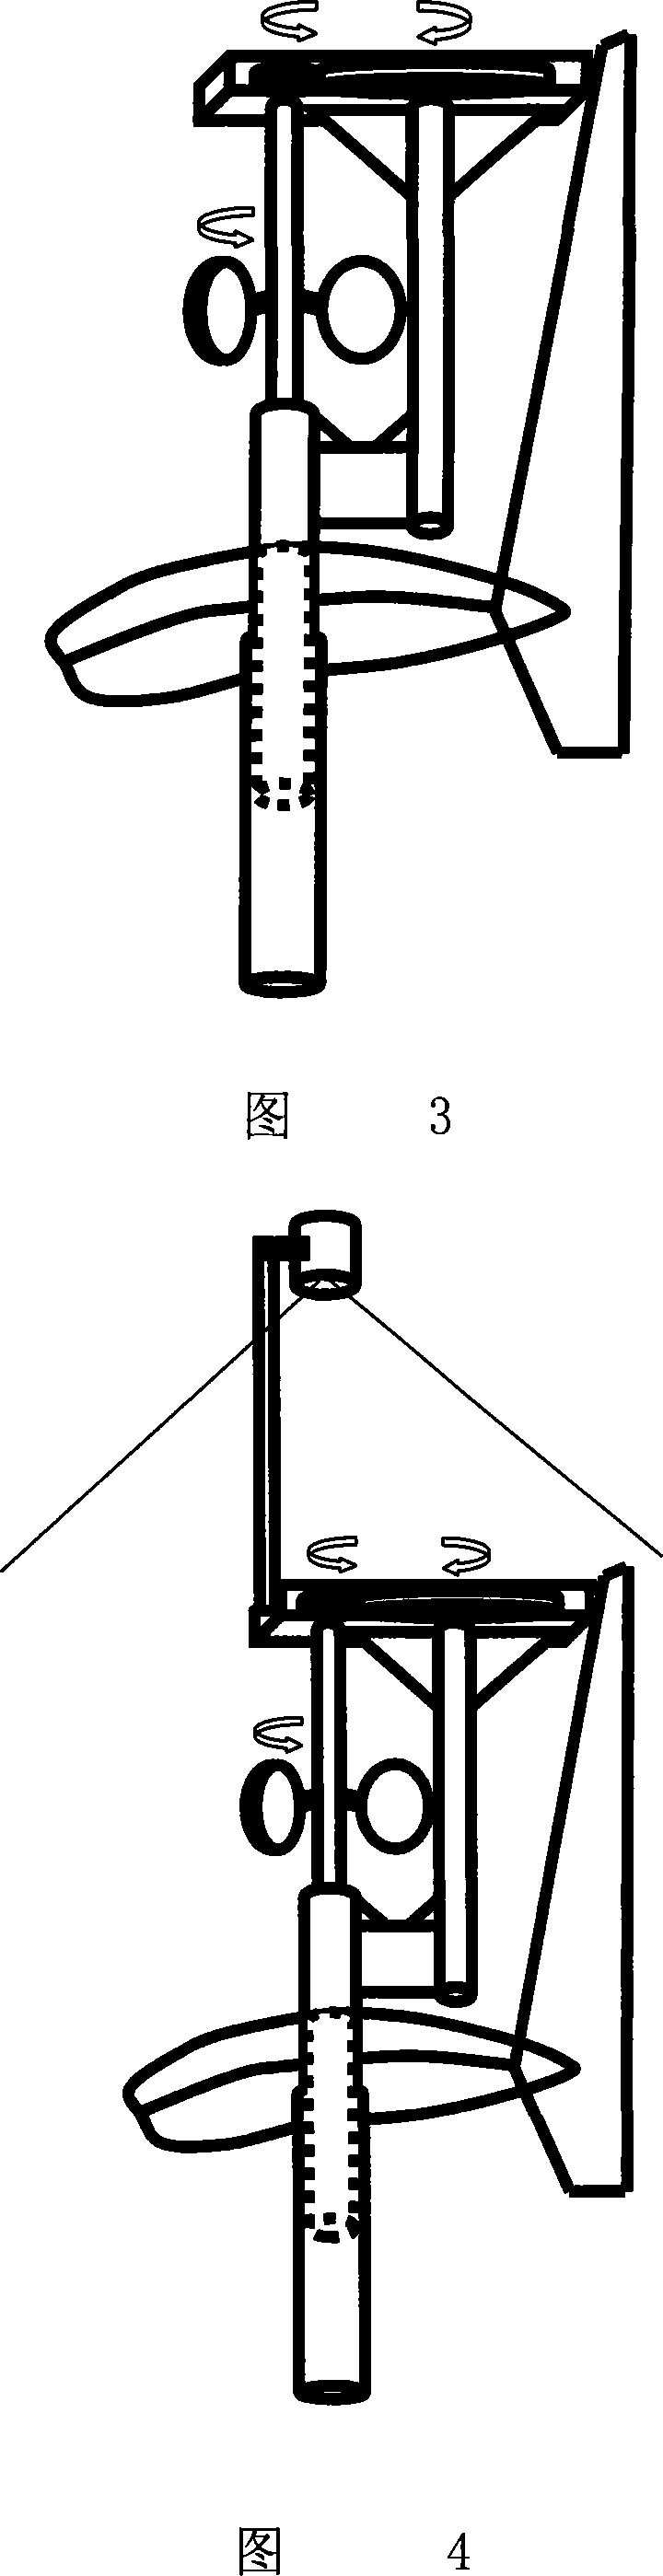 Tri-dimensional wind speed wind direction measuring apparatus based on omnidirectional vision